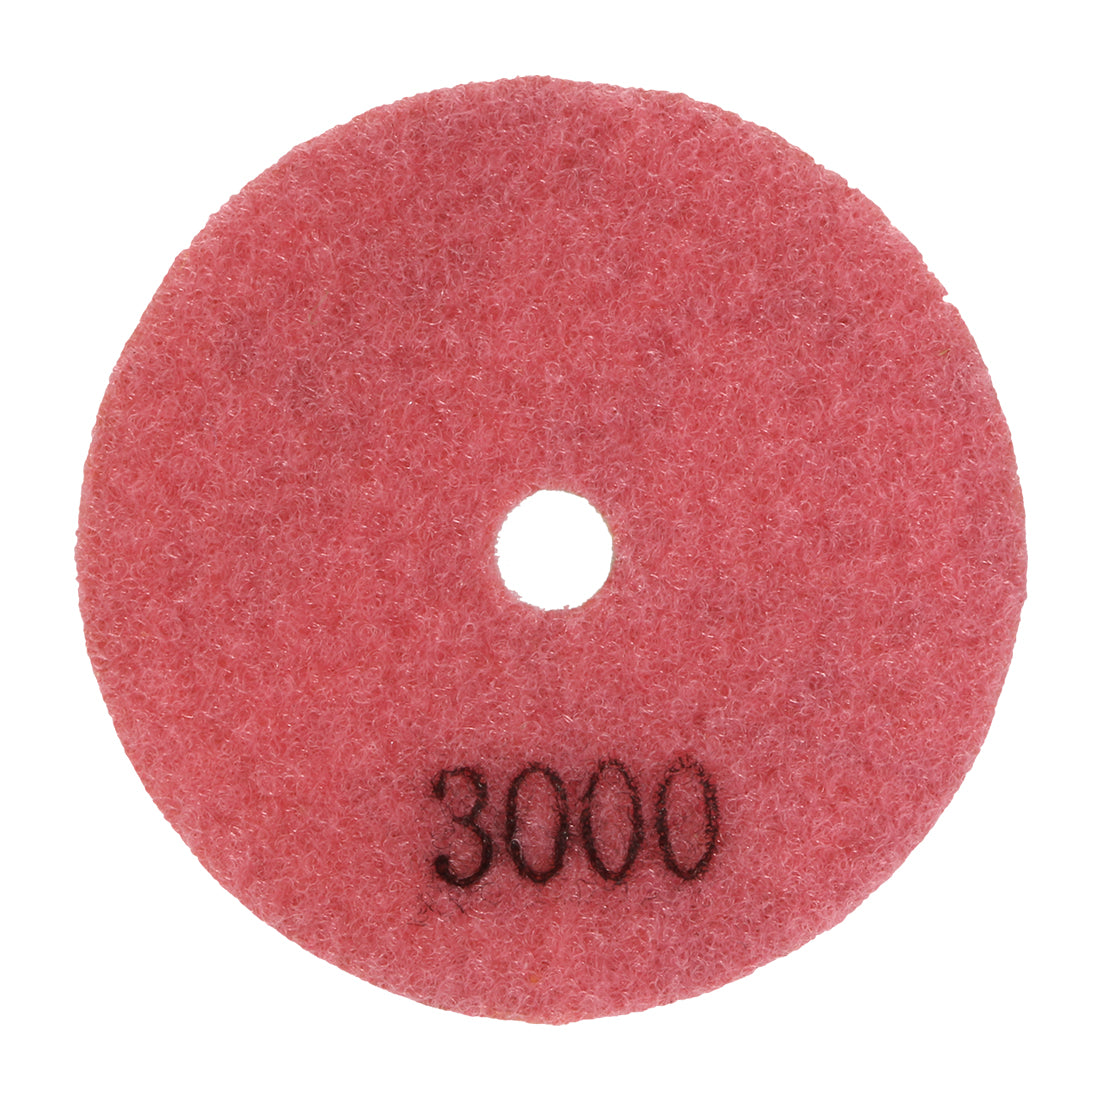 uxcell Uxcell 3-inch Diamond Wet Polishing Pad Disc Grit 3000 10pcs for Granite Stone